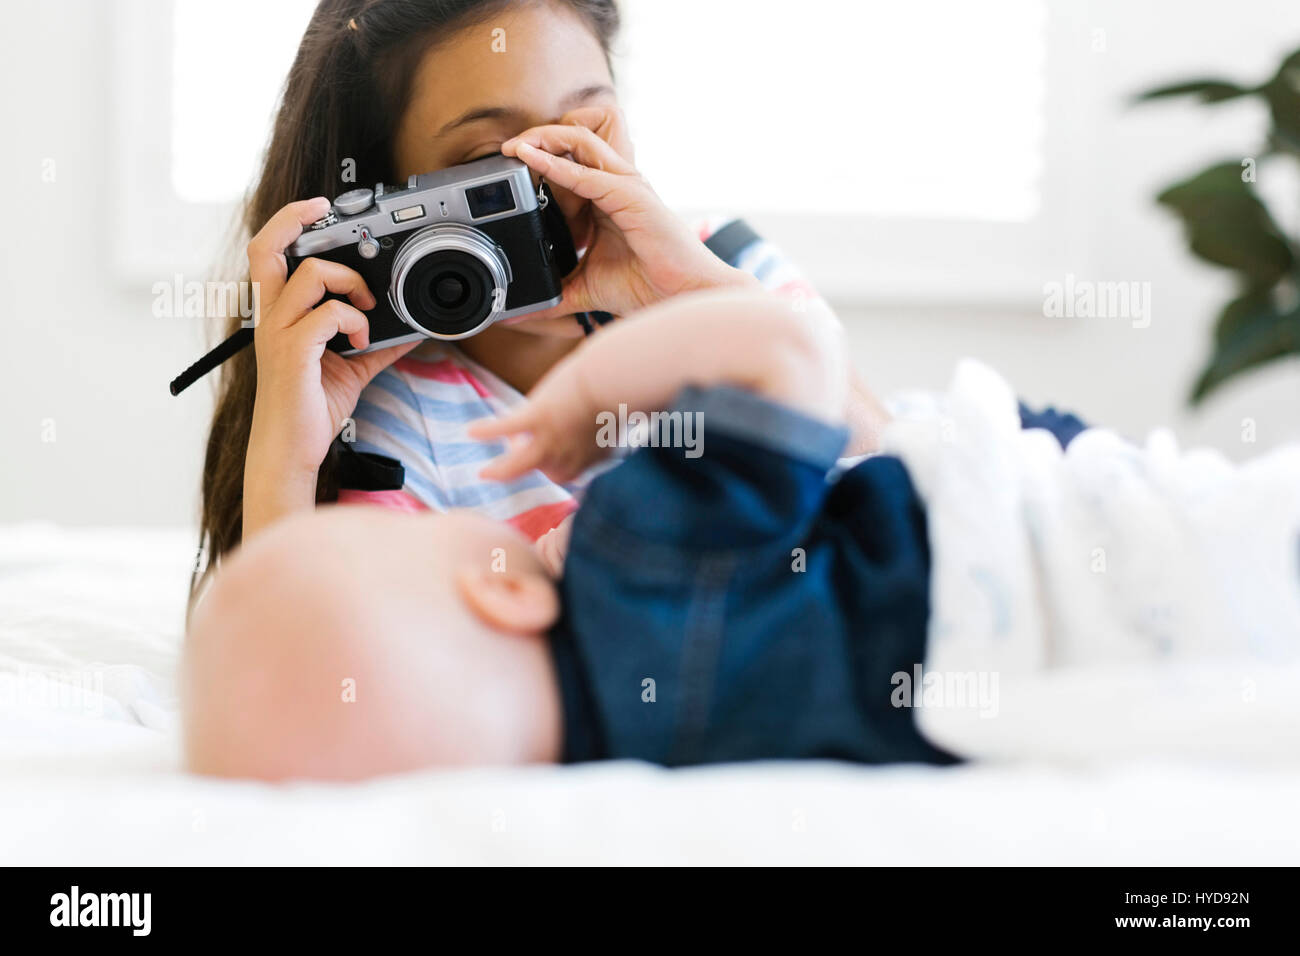 Girl(10-11) taking photo of her small brother (12-17 months) lying on bed Stock Photo